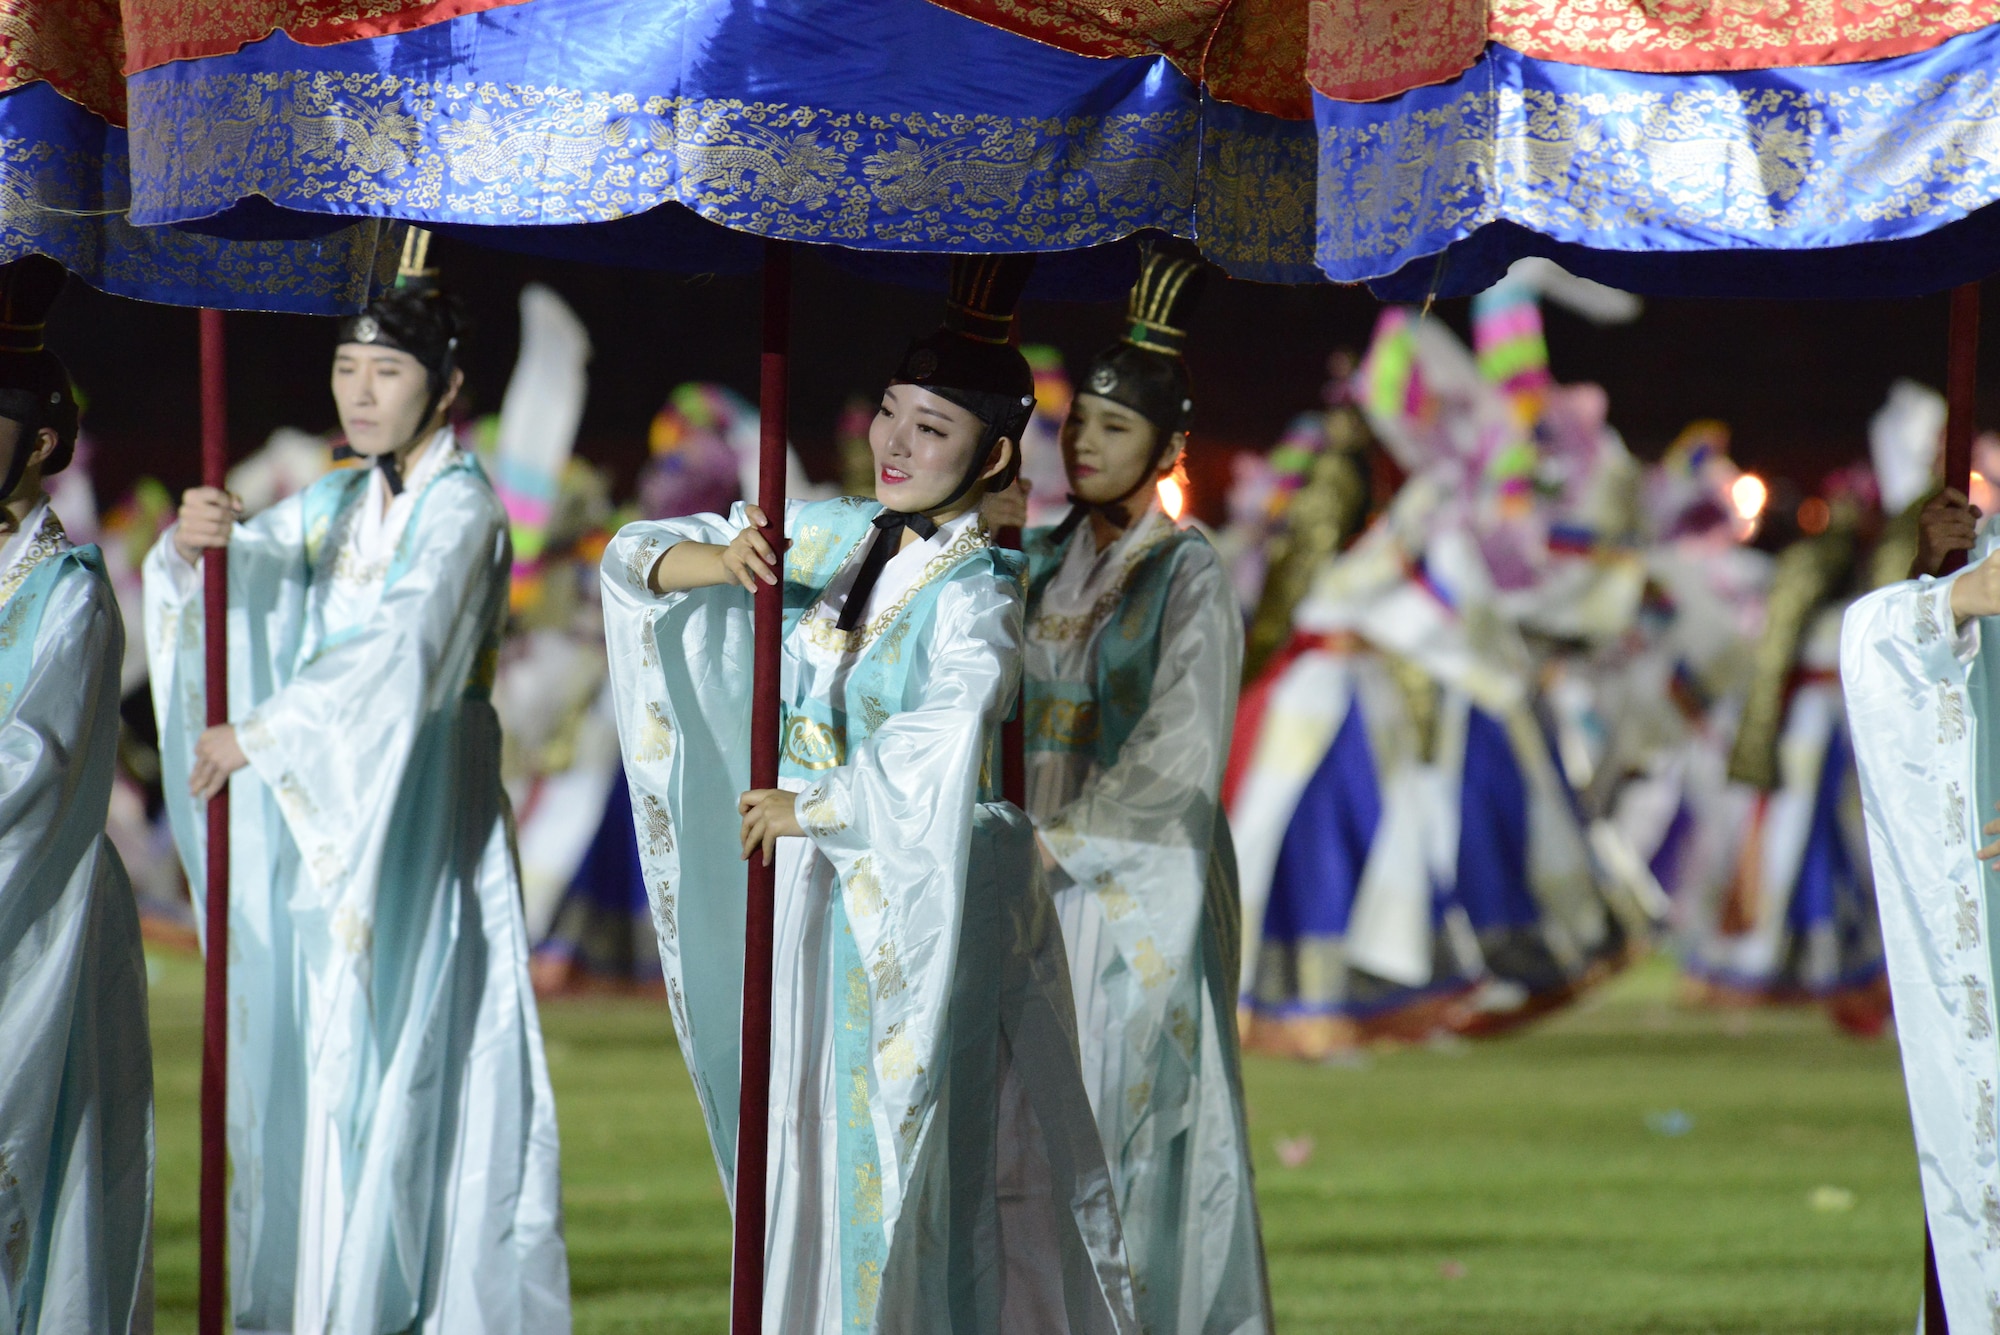 Korean traditional dancers perform at the opening ceremony of the International Military Sports Council World Games in Mungyeong, South Korea, Oct. 2, 2015. (U.S. Armed Forces Sports photo/Gary Sheftick)